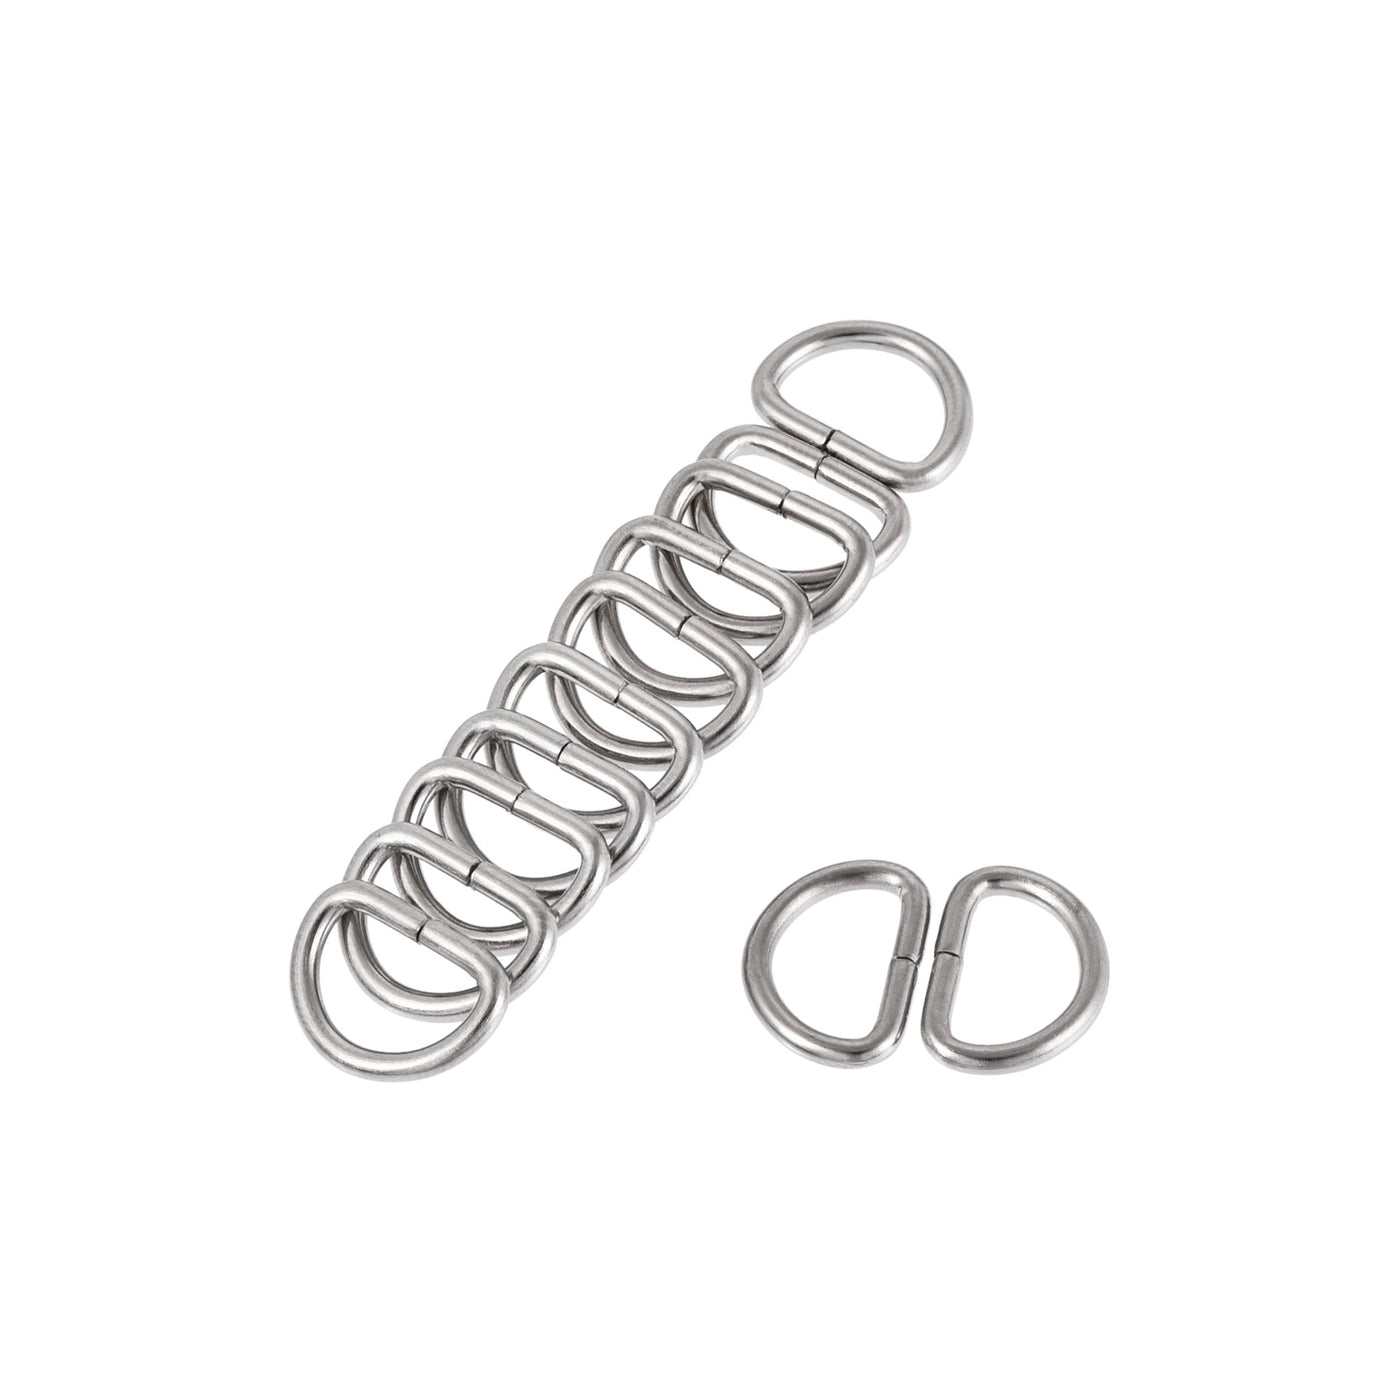 uxcell Uxcell Metal D Ring 0.39"(10mm) D-Rings Buckle for Hardware Bags Belts Craft DIY Accessories Silver Tone 150pcs